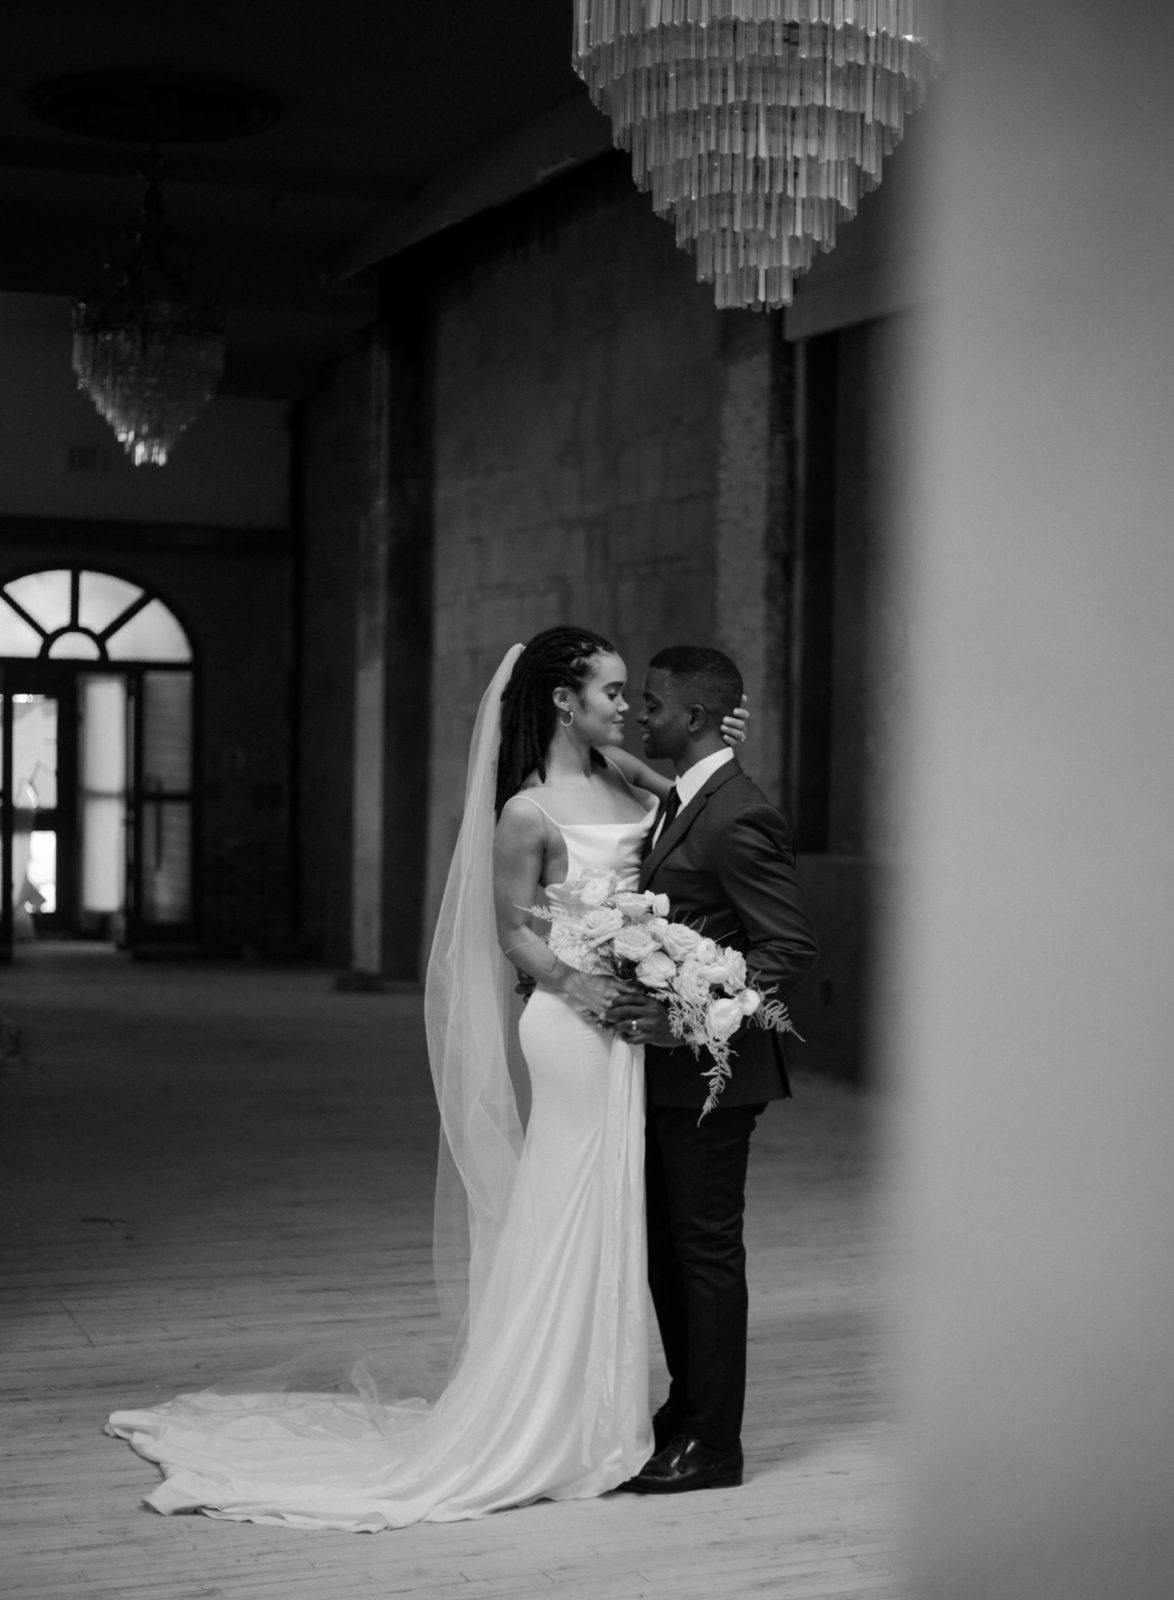 black and white photography, Antique wedding style, modern bridal portraits